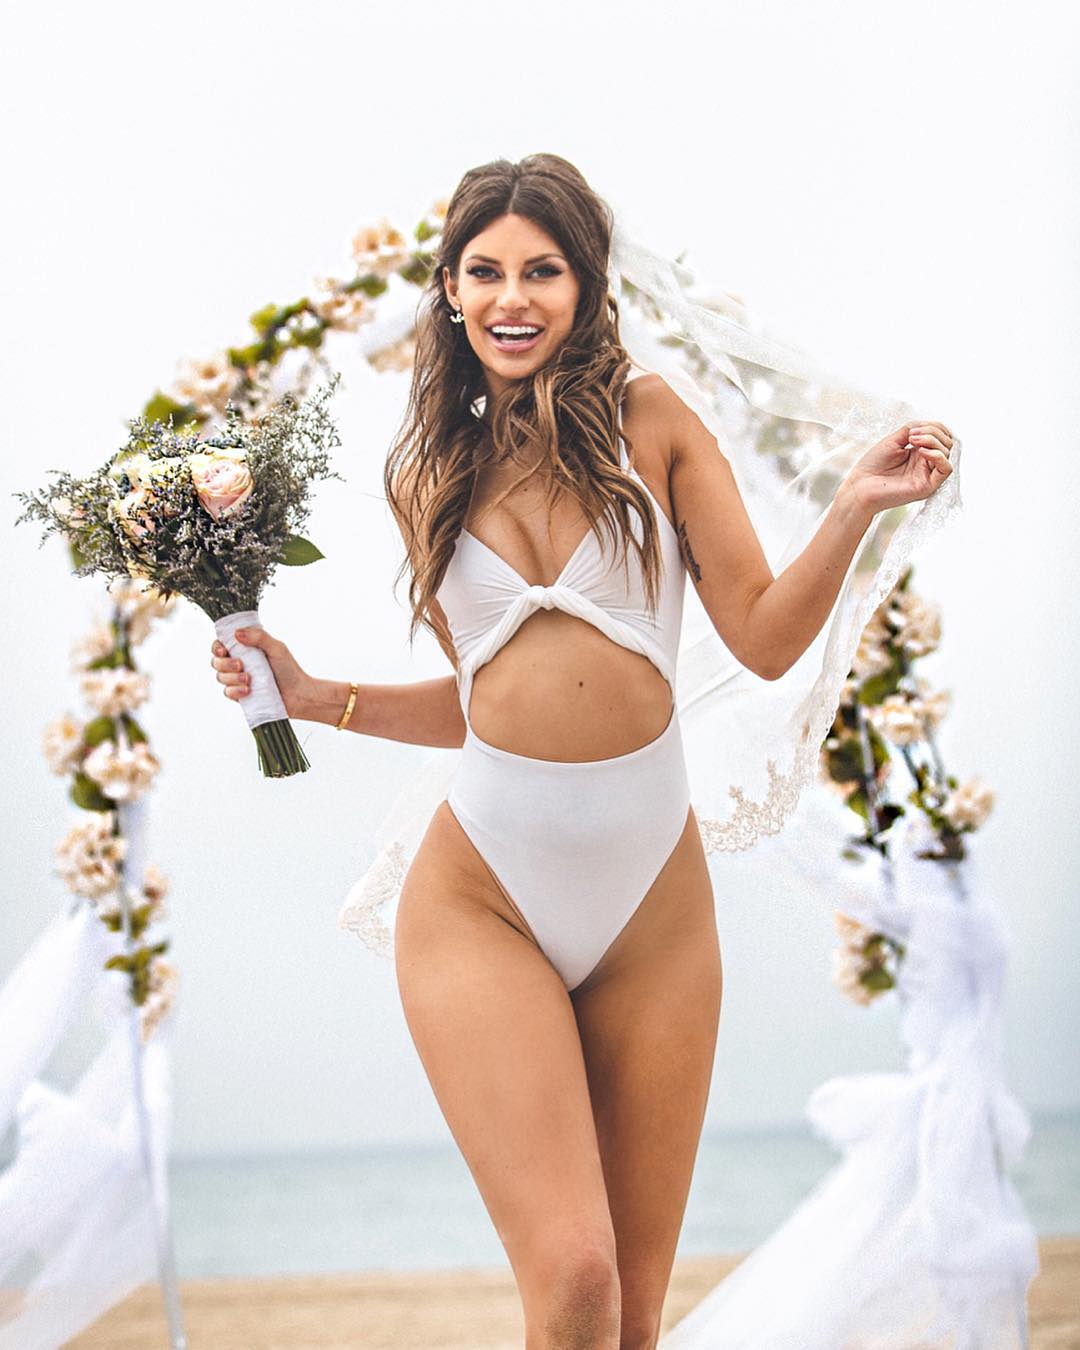 49 Hottest Hannah Stocking Bikini Pictures Explore Her Amazing Sexy Body | Best Of Comic Books